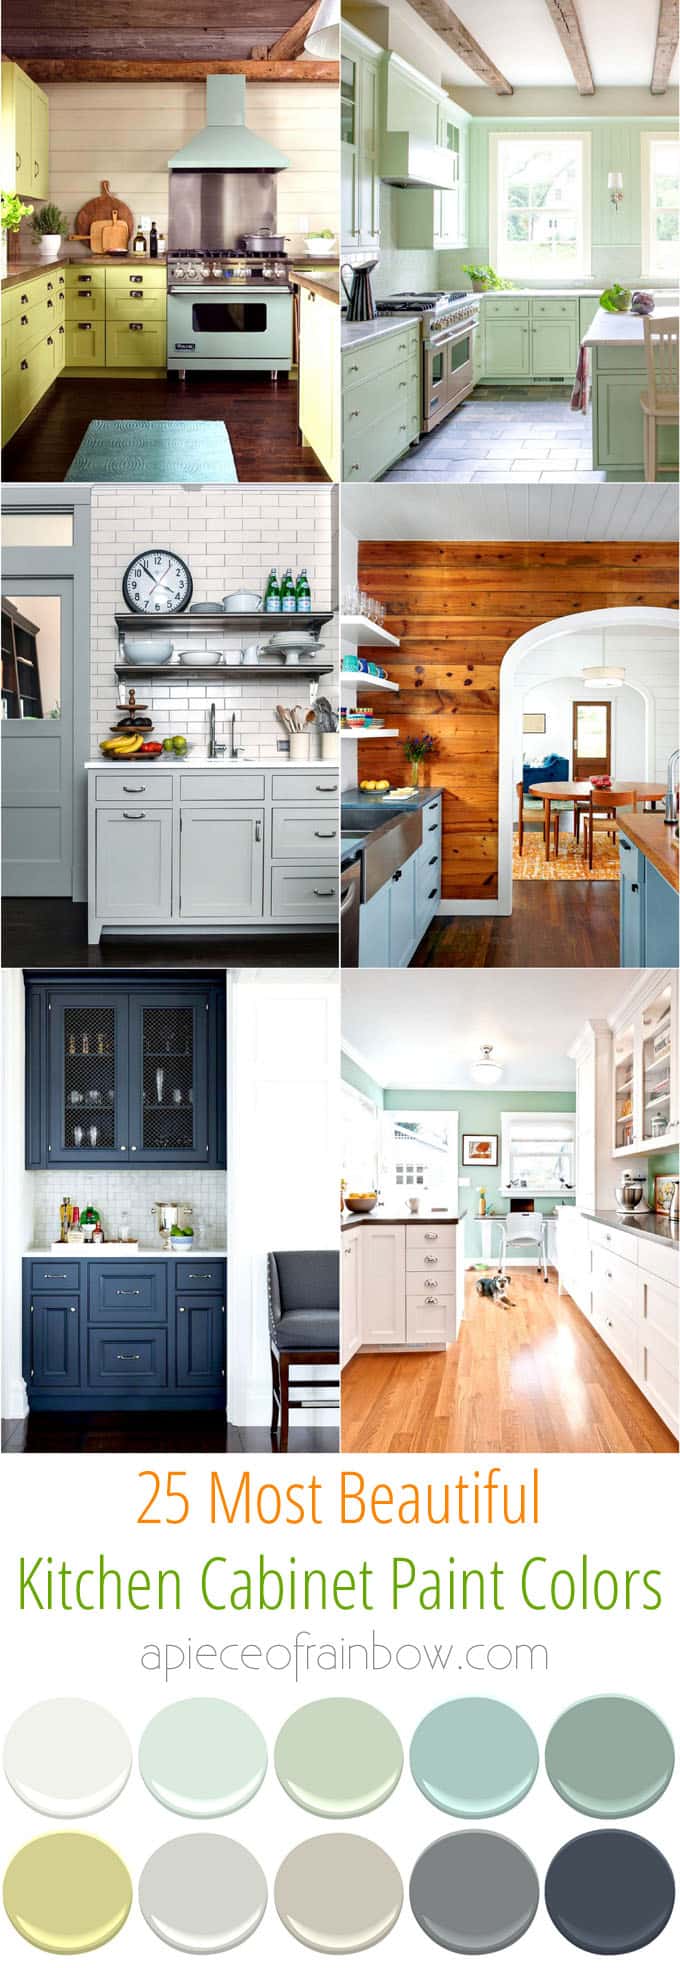 25 beautiful paint colors for kitchen cabinets , from white, mint, to navy blue and charcoal black